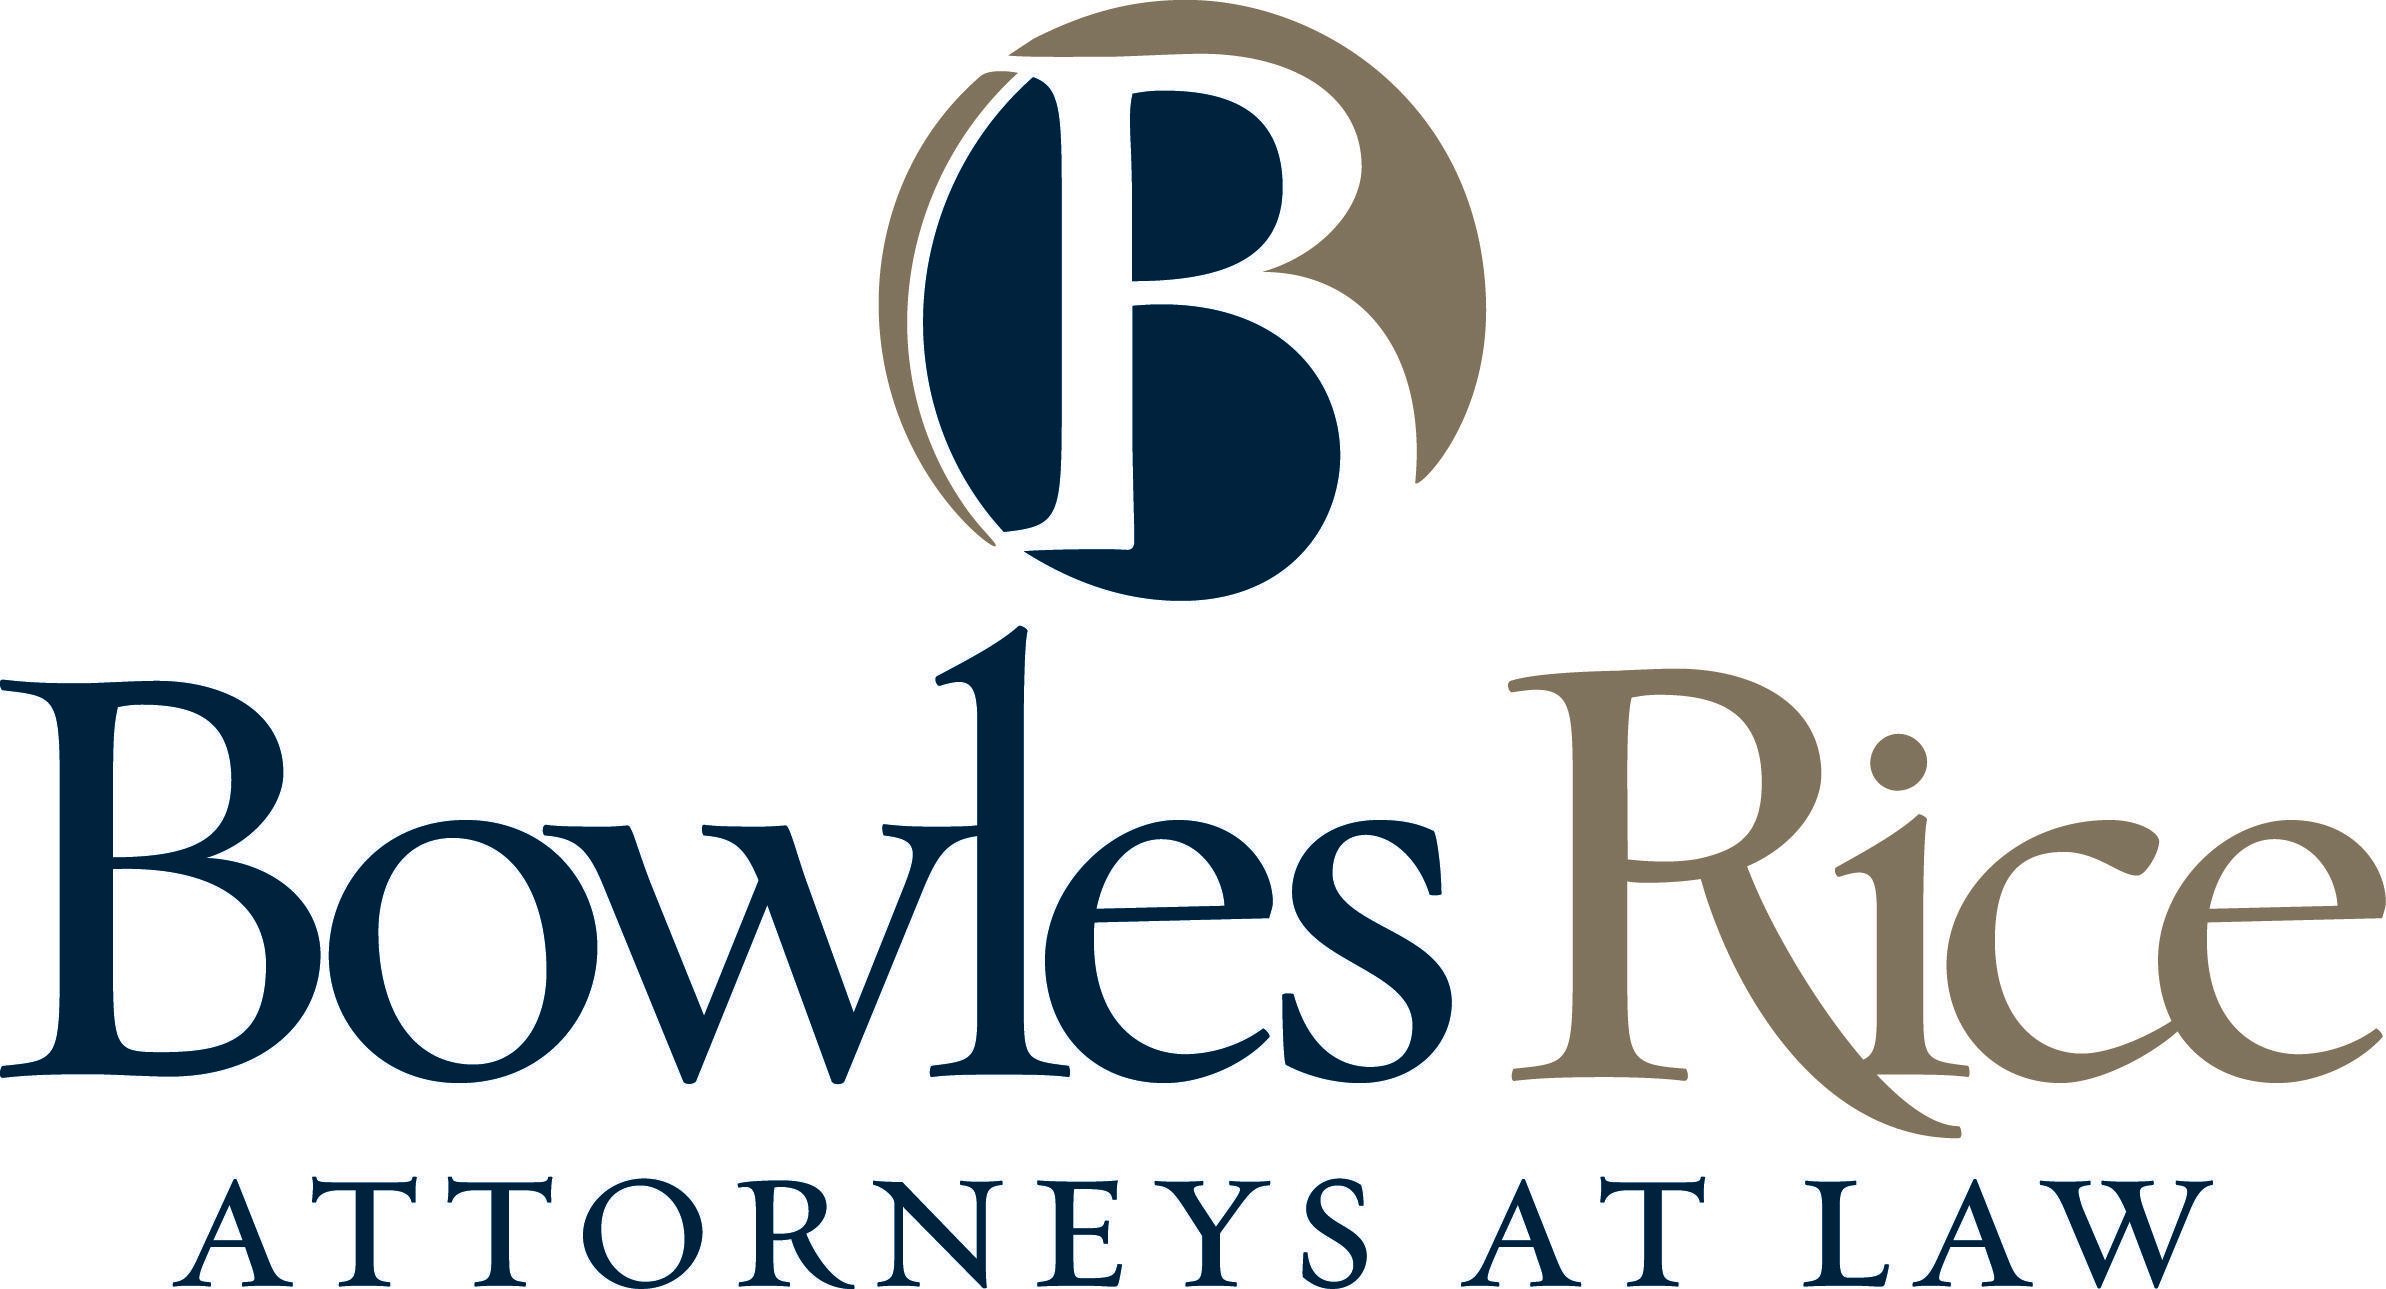 Legal Service Logo - Bowles Rice LLP. Lawyers & Legal Services Area